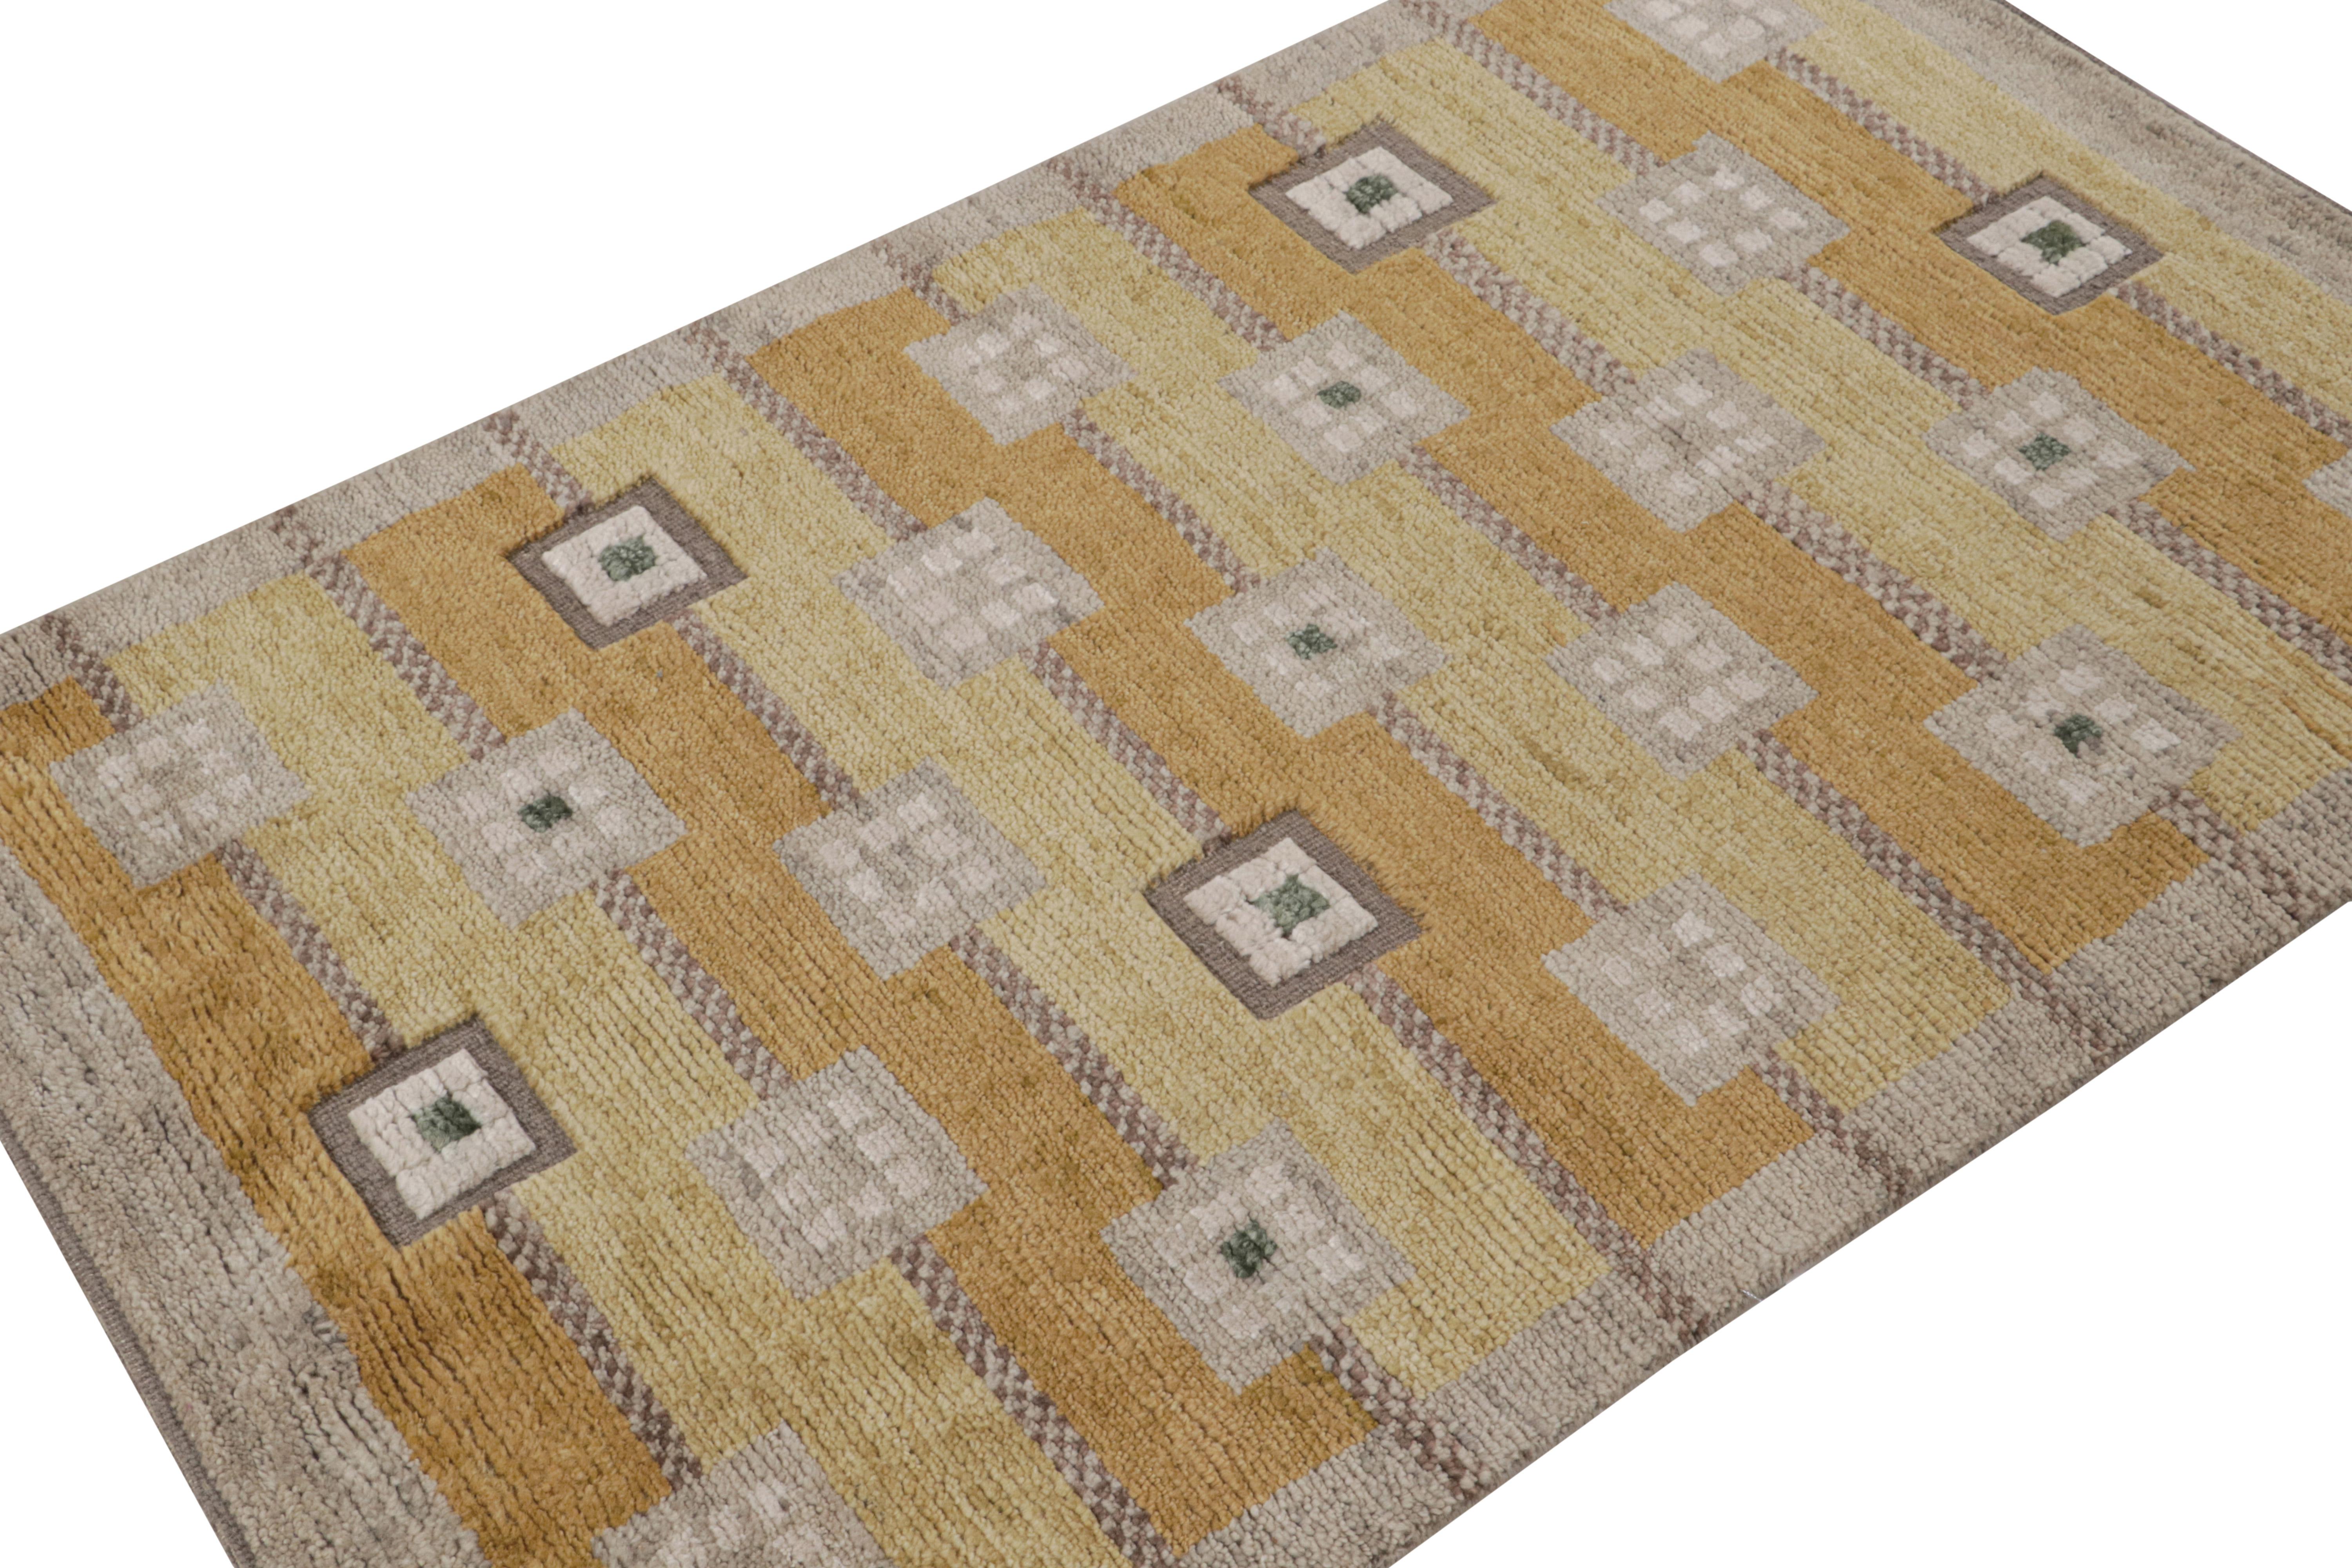 This 3x5 rug is from the Scandinavian rug collection by Rug & Kilim. Hand knotted in wool and undyed natural yarns, its design is a modern take on Rollakan and Rya rugs in the Swedish Deco style. 

On the Design: 

The Swedish style rug enjoys